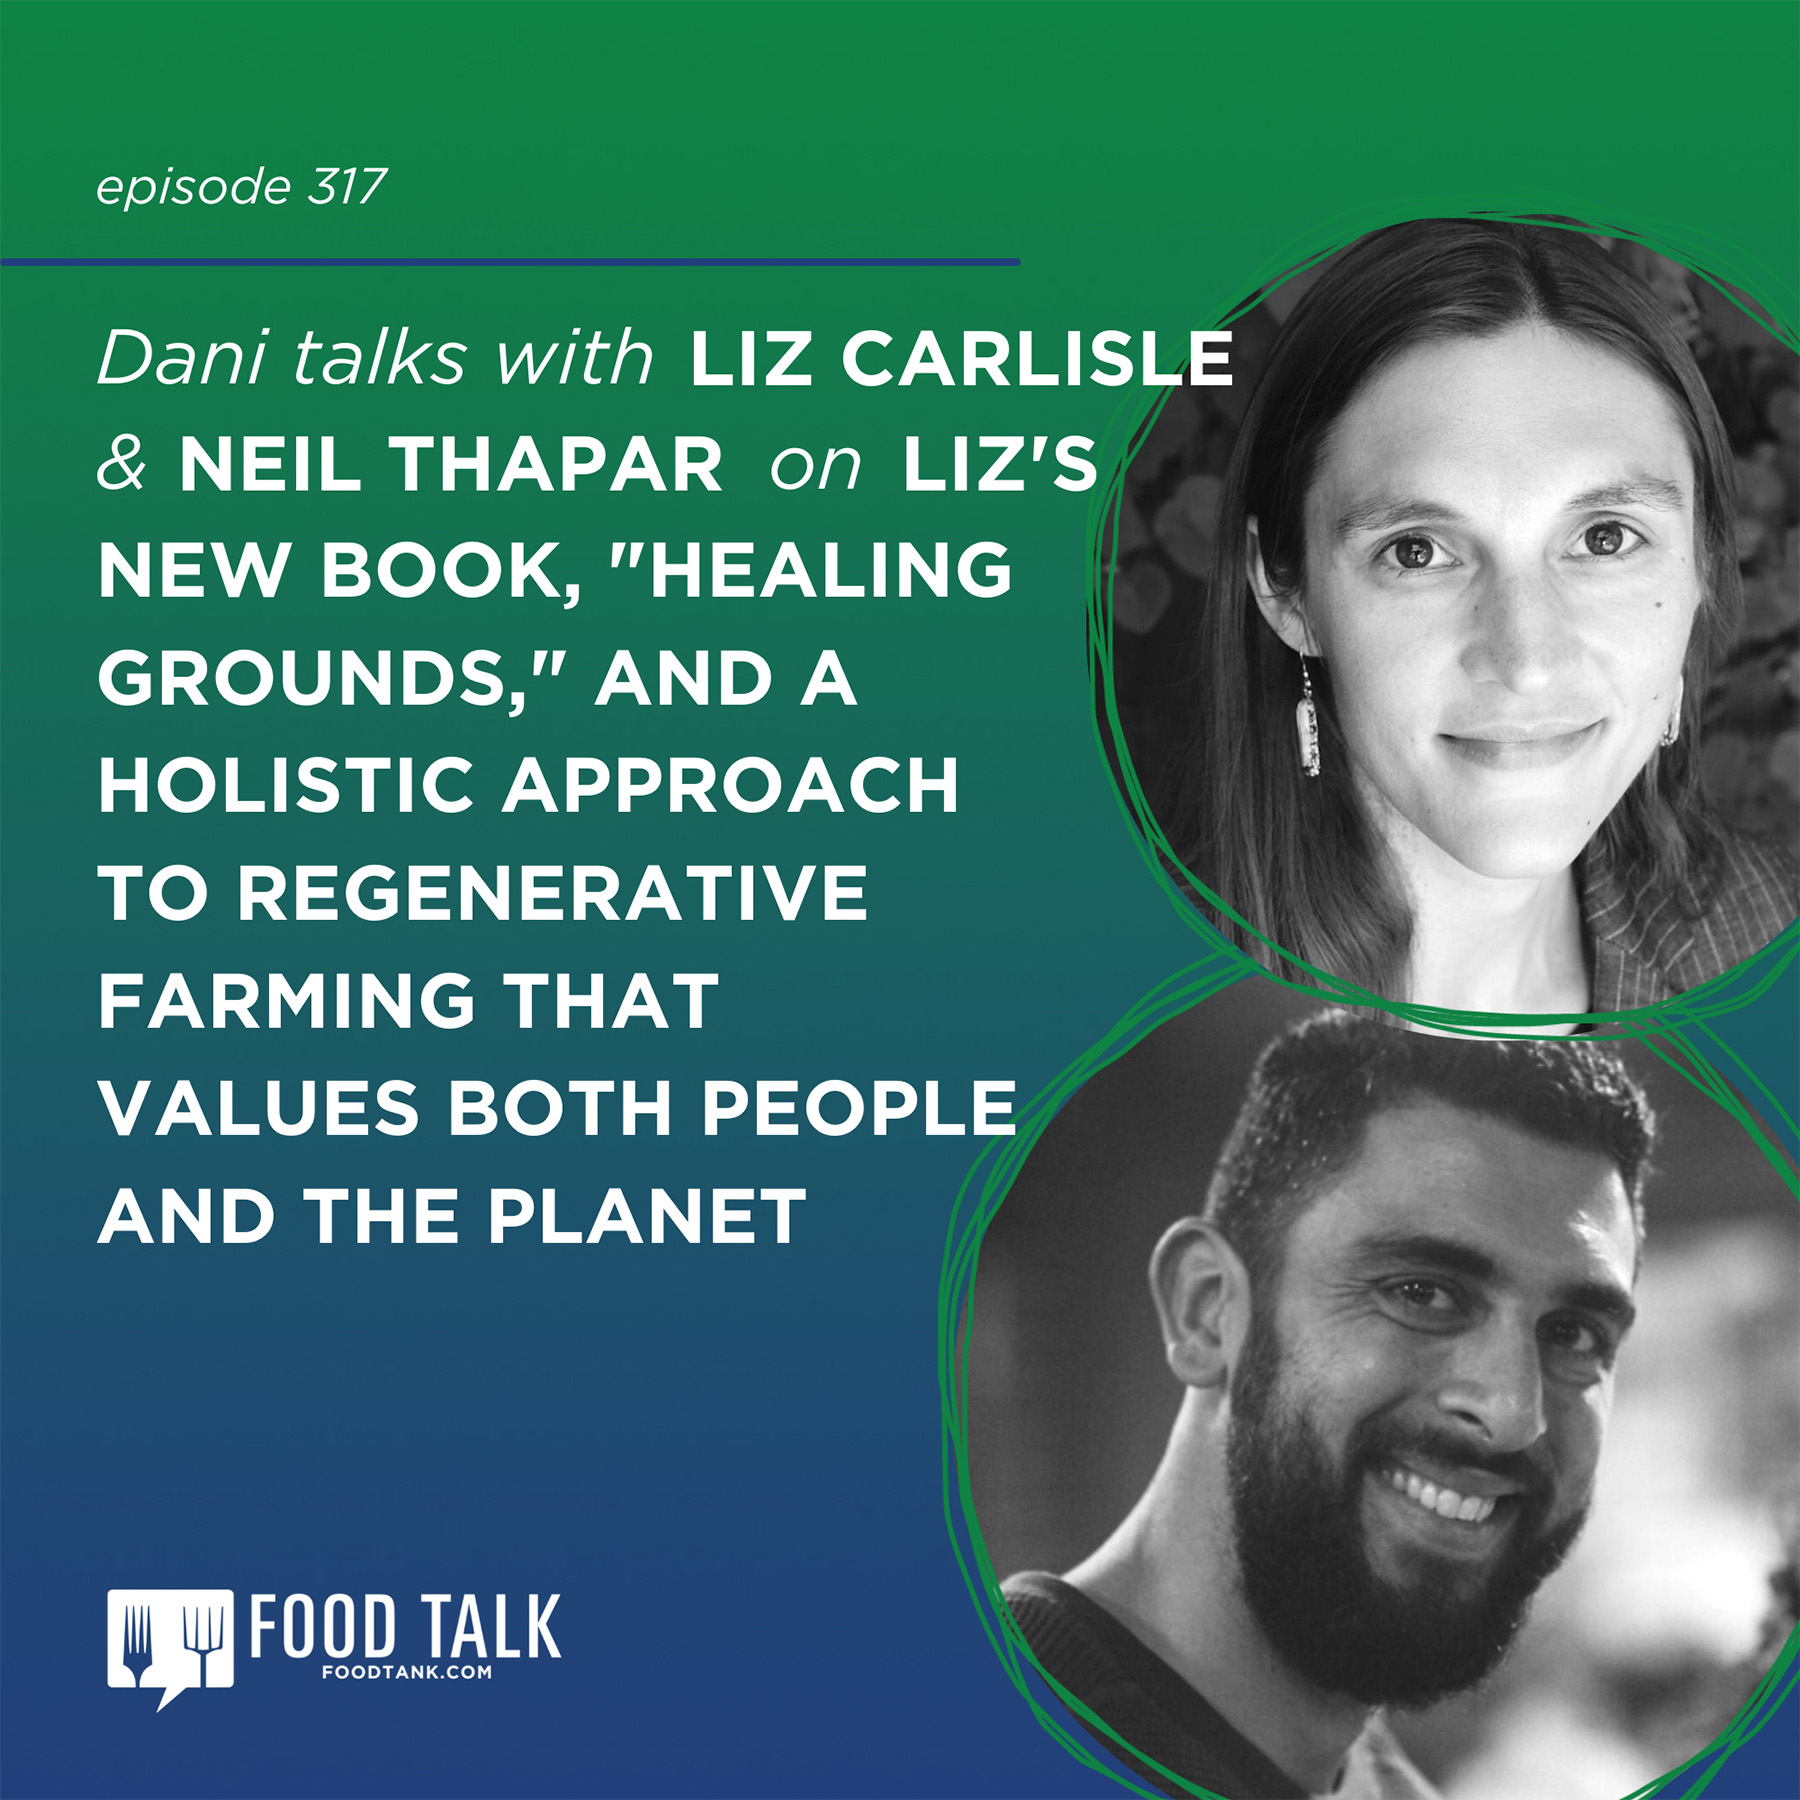 https://podcasts.apple.com/us/podcast/317-liz-carlisle-and-neil-thapar-on-lizs-new-book/id1434128568?i=1000557580235